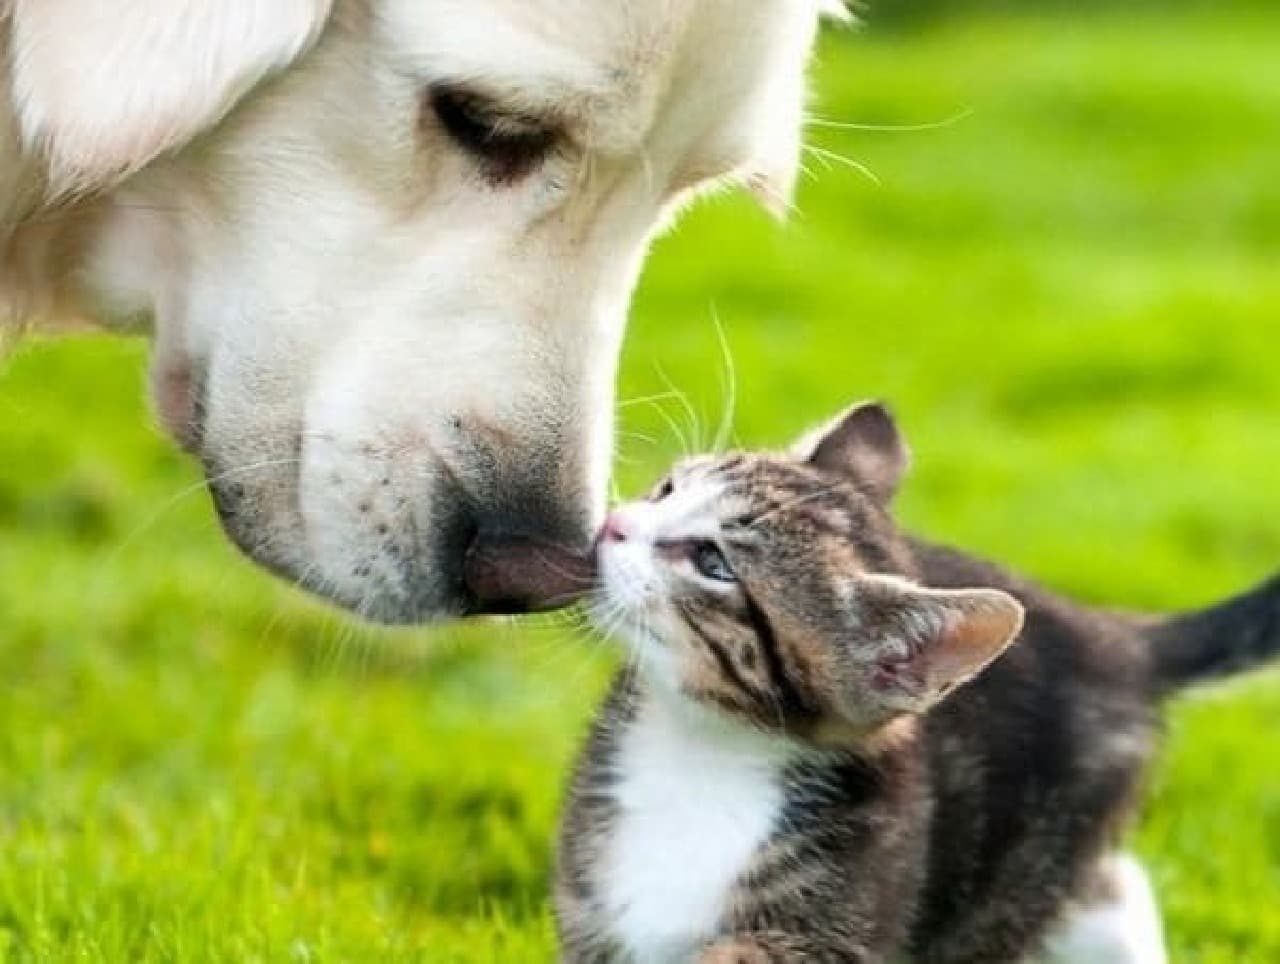 Build a win-win relationship with cats (The image is an image of a win-win between a dog and a cat)